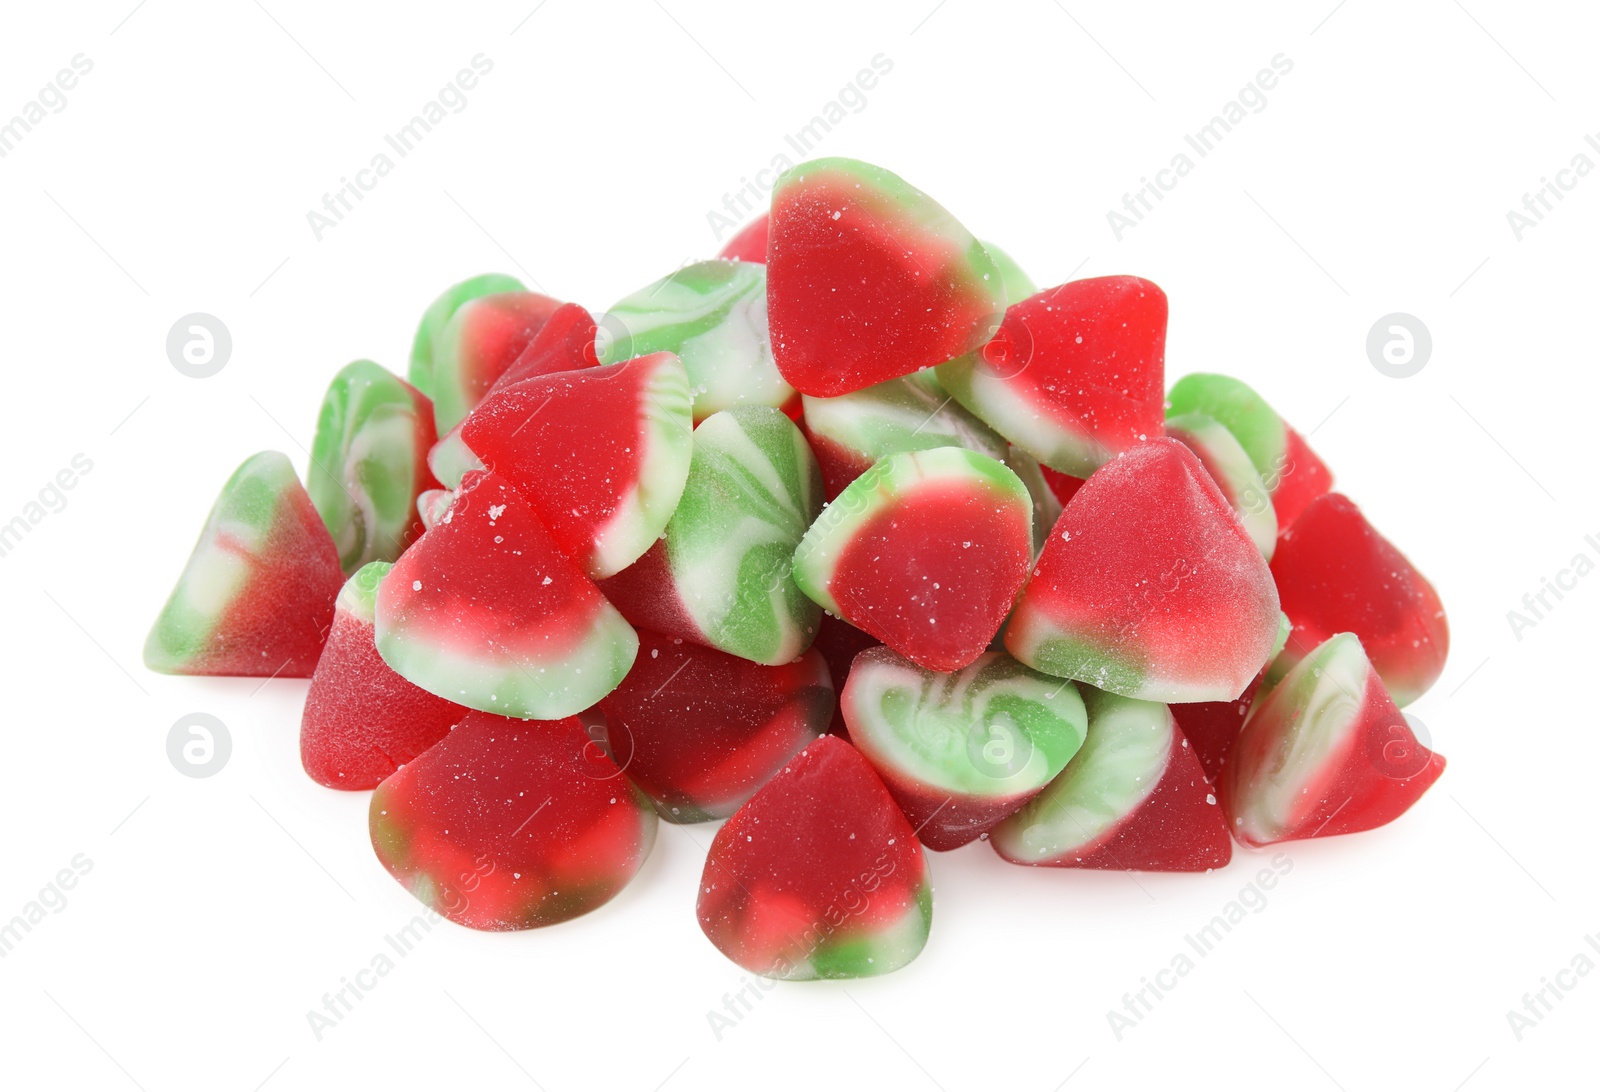 Photo of Pile of tasty colorful jelly candies on white background